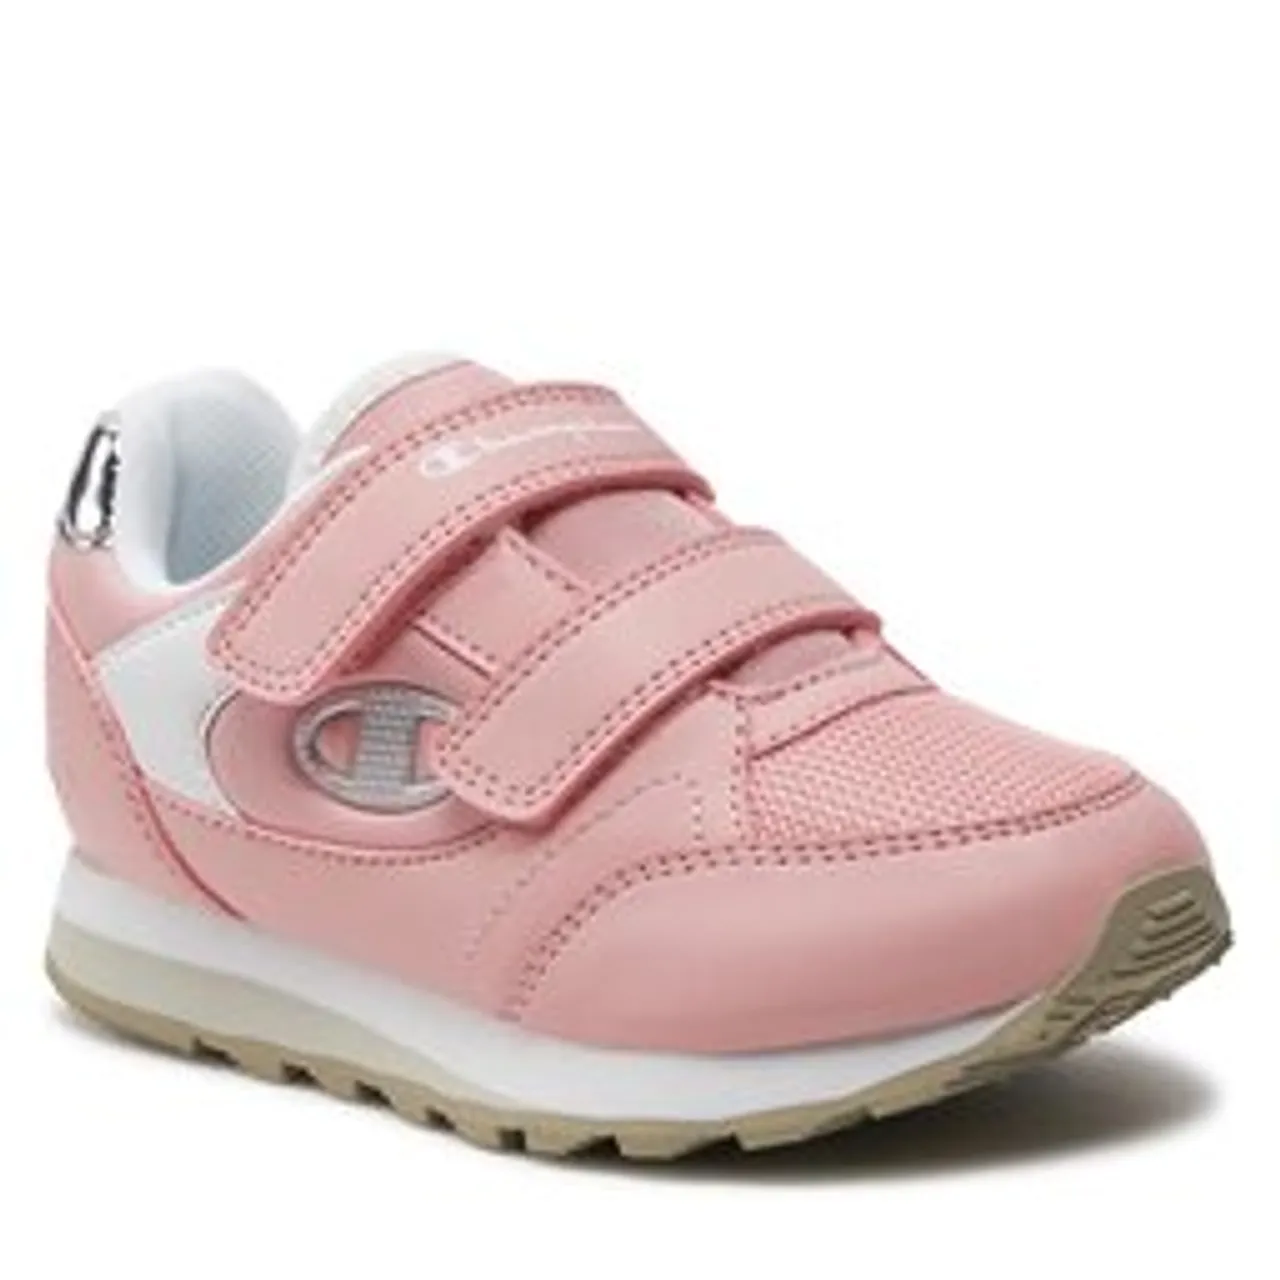 Sneakers Champion Rr Champ Ii G Ps Low Cut Shoe S32756-CHA-PS127 Dusty Rose/Silver